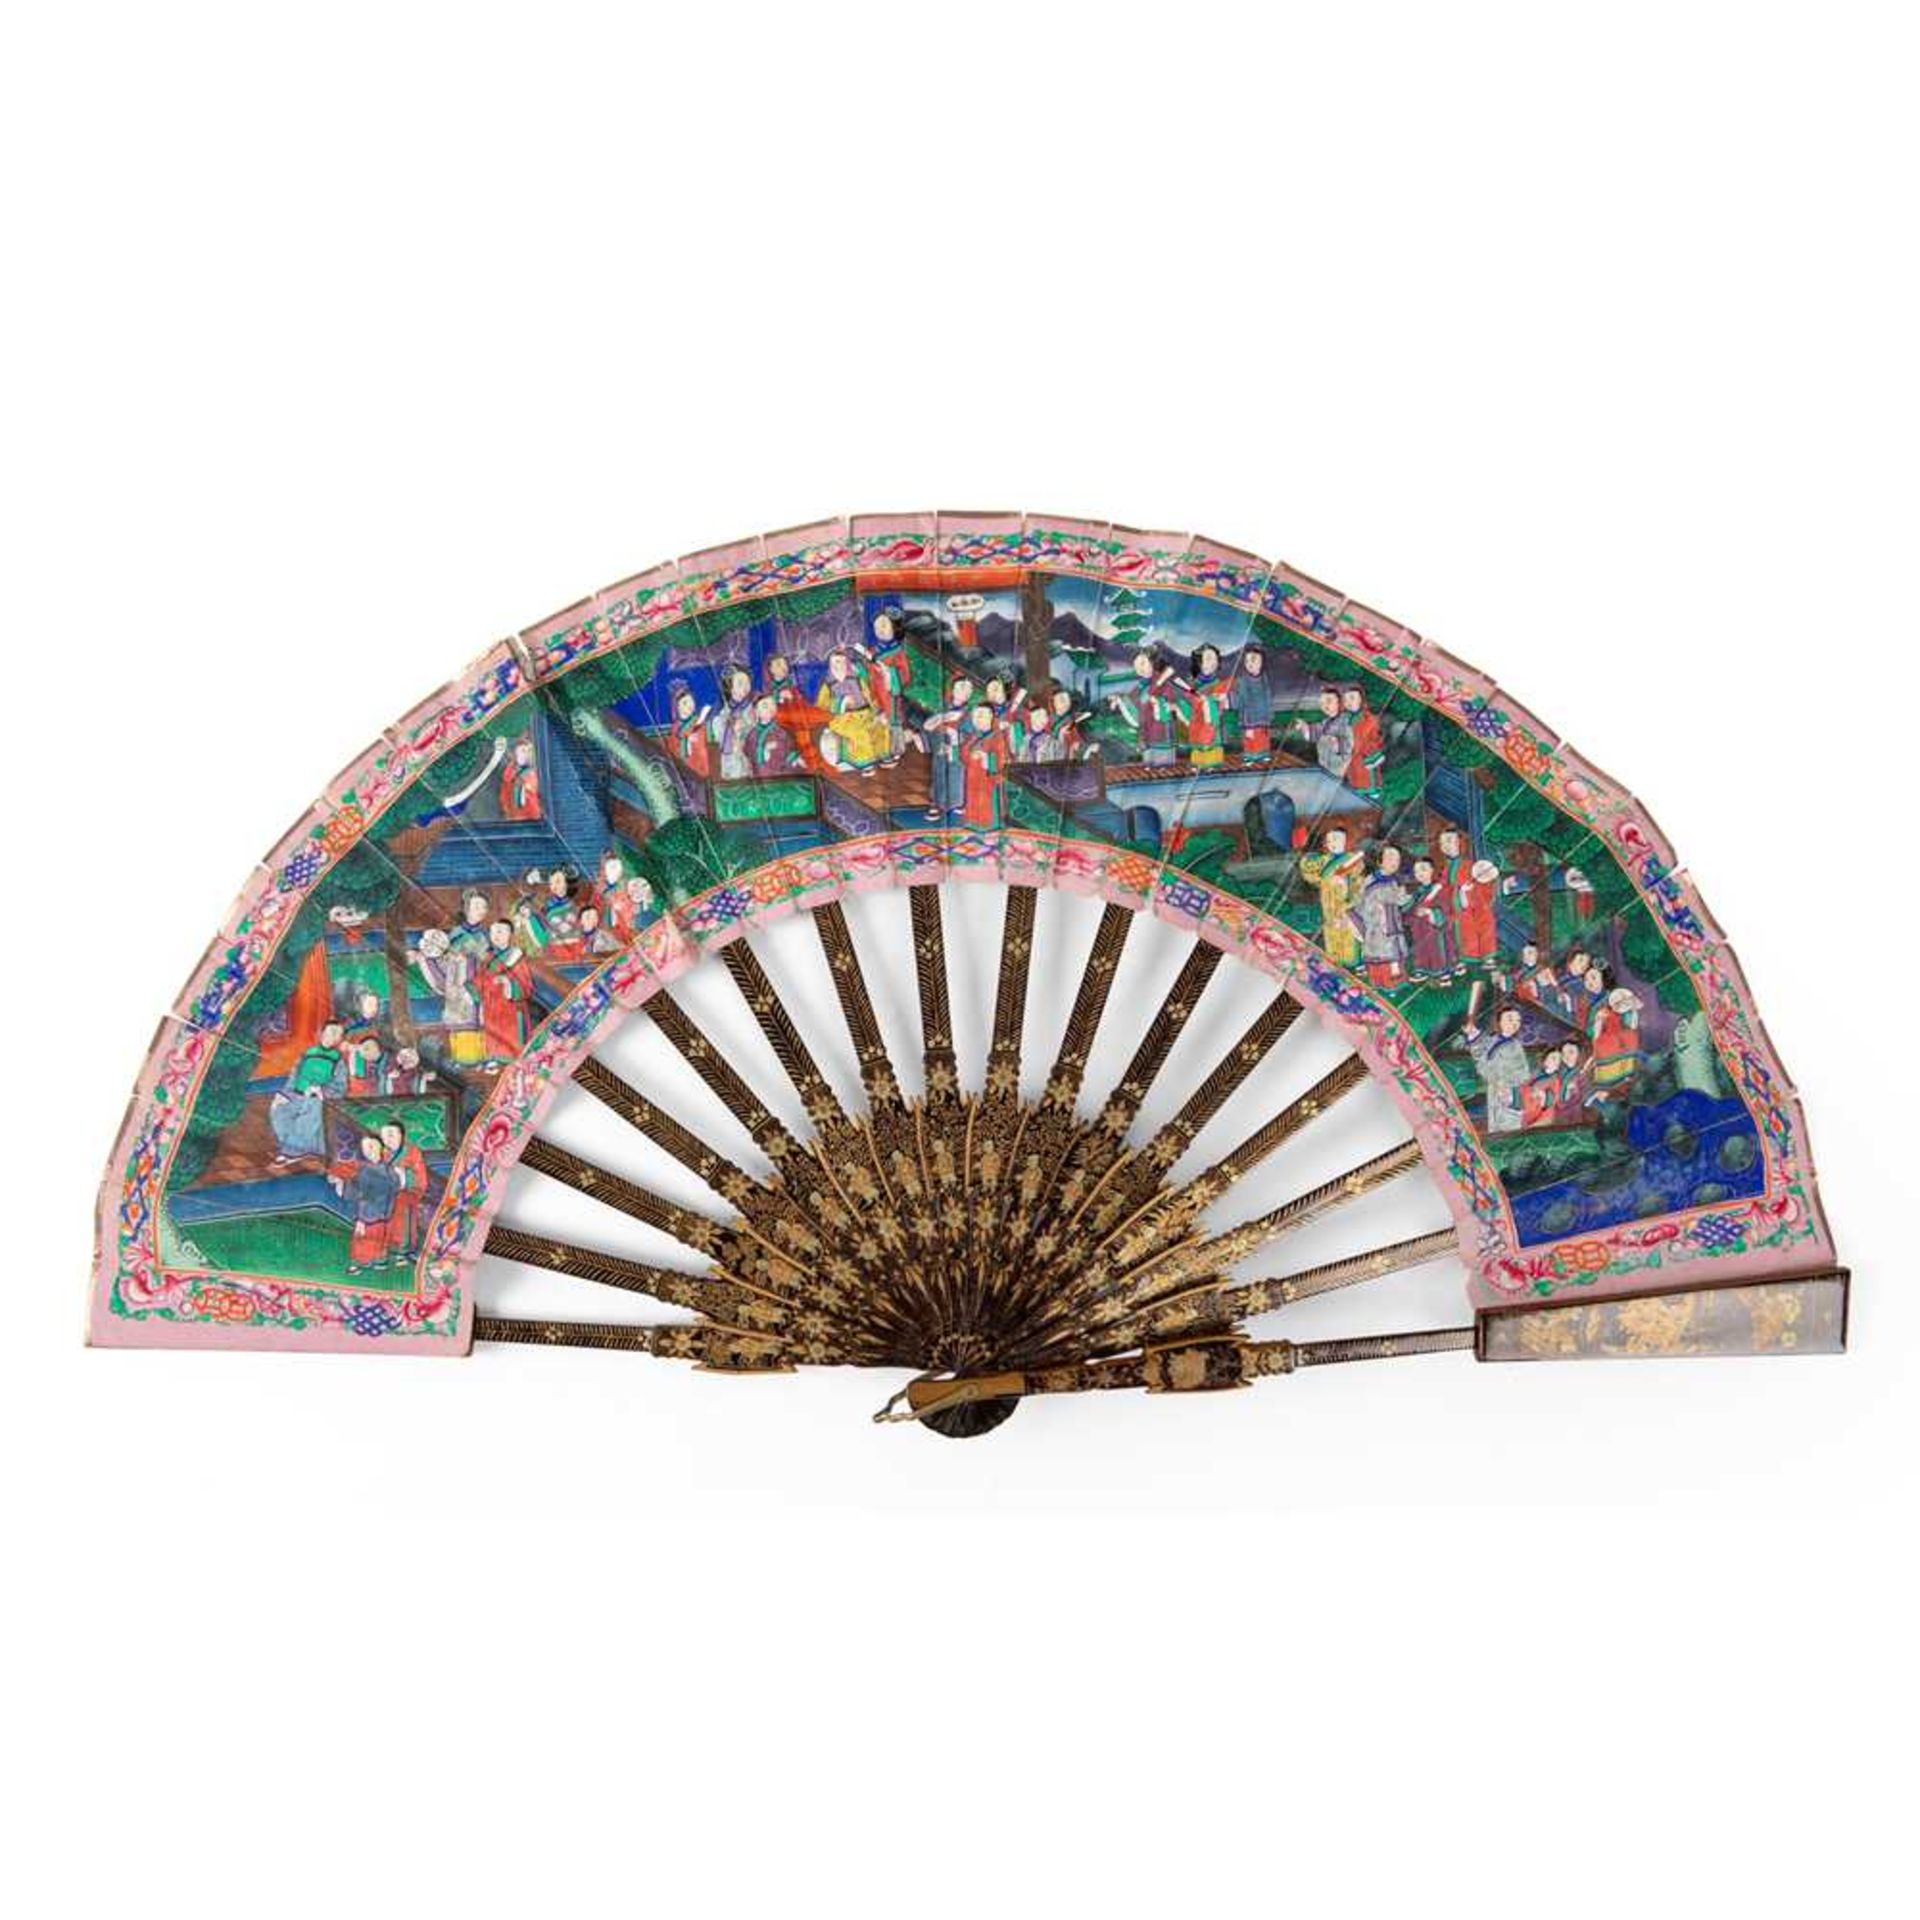 CANTON LACQUERED AND PAPER 'TELESCOPIC' FAN QING DYNASTY, MID-19TH CENTURY - Image 3 of 4